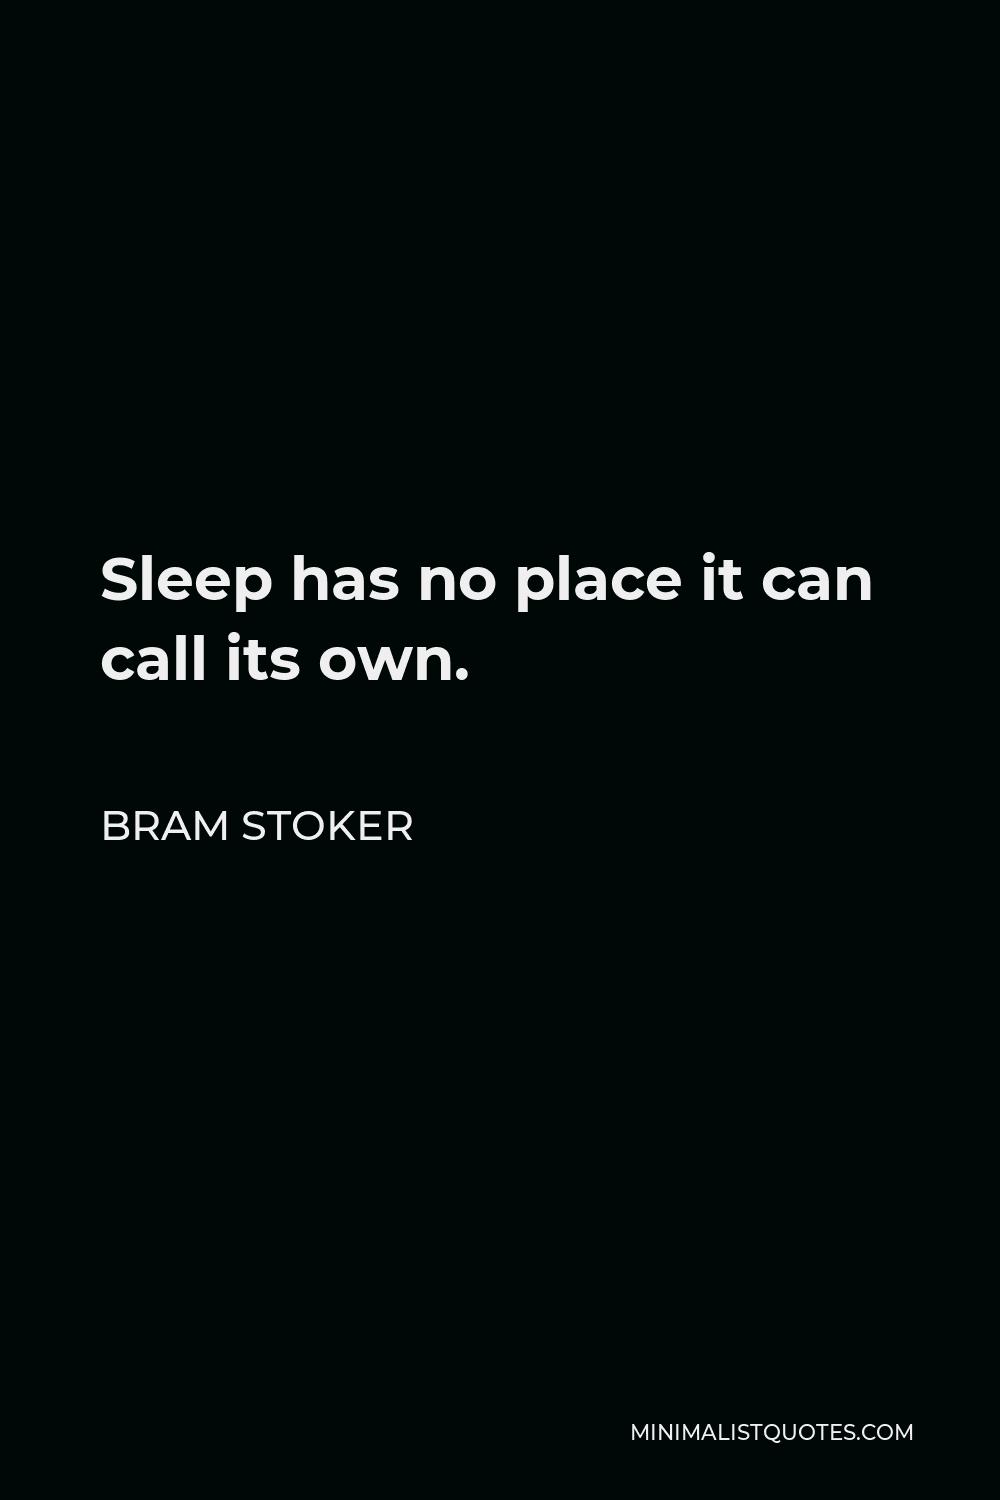 Bram Stoker Quote - Sleep has no place it can call its own.